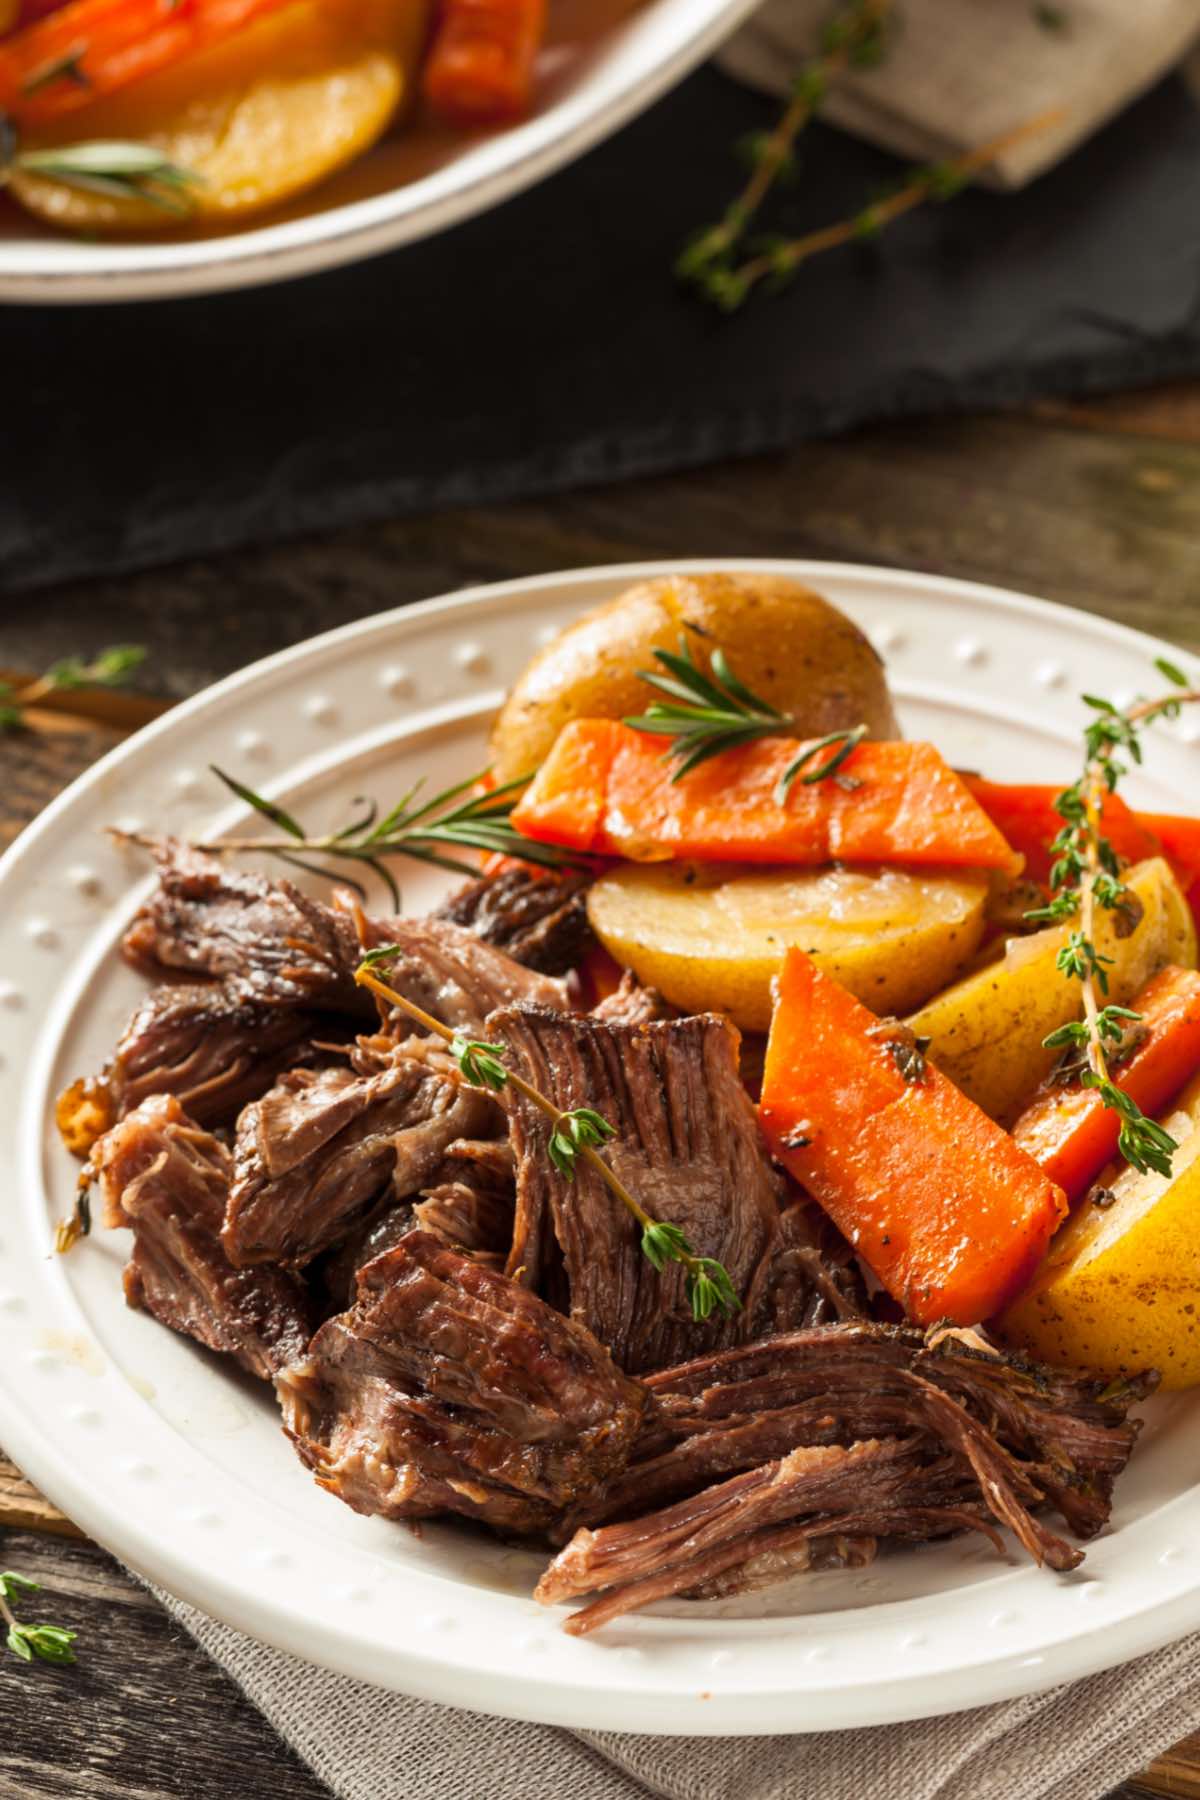 Chuck roast cooked in the oven as a pot roast and served shredded with vegetables on a plate